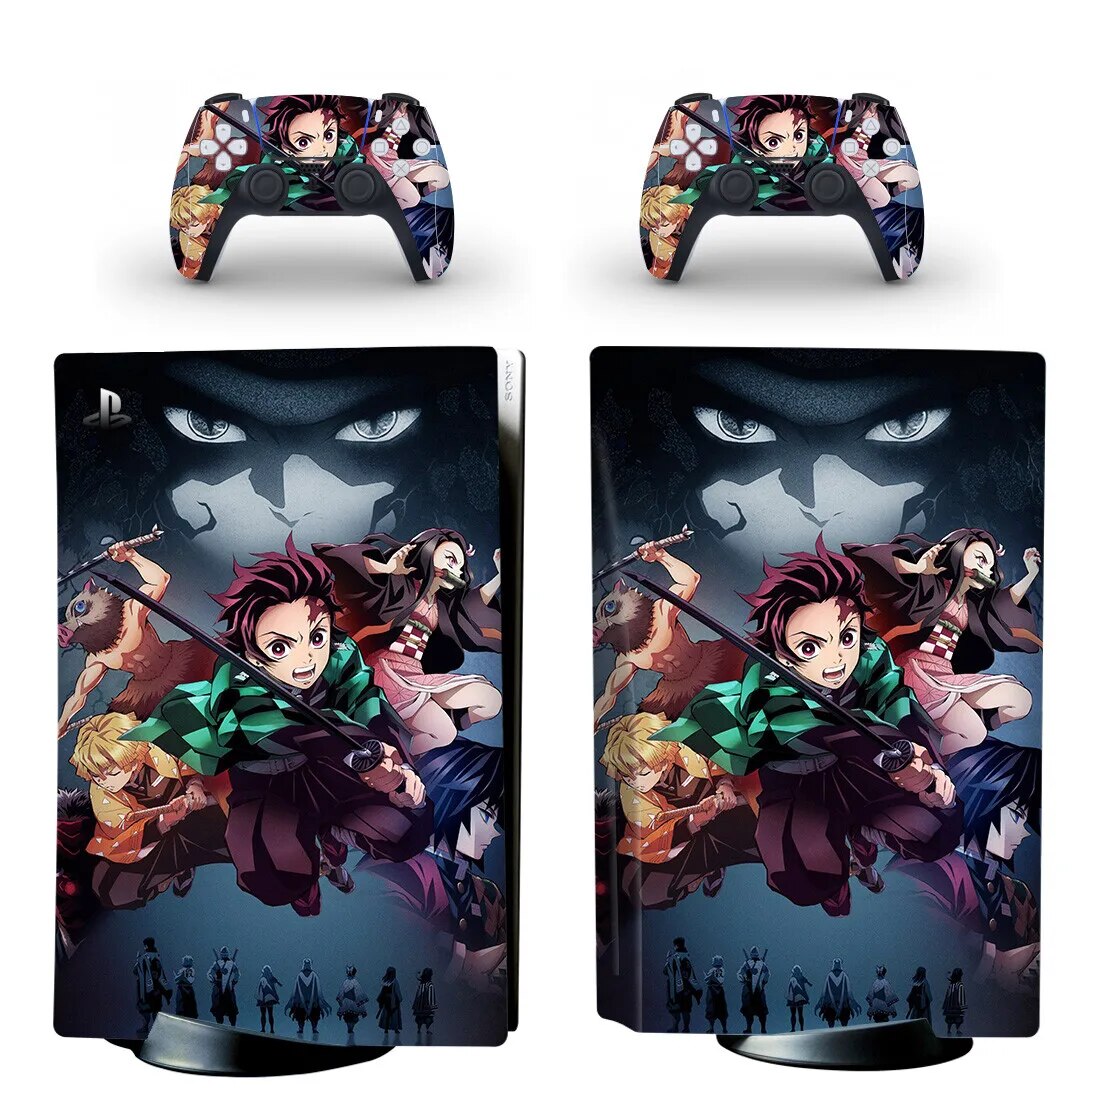 【High Cost-Performance】 Ghost Game Ps5 Disc Edition Skin Sticker For 5 Console And Controllers Ps5 Skin Sticker Decal Cover